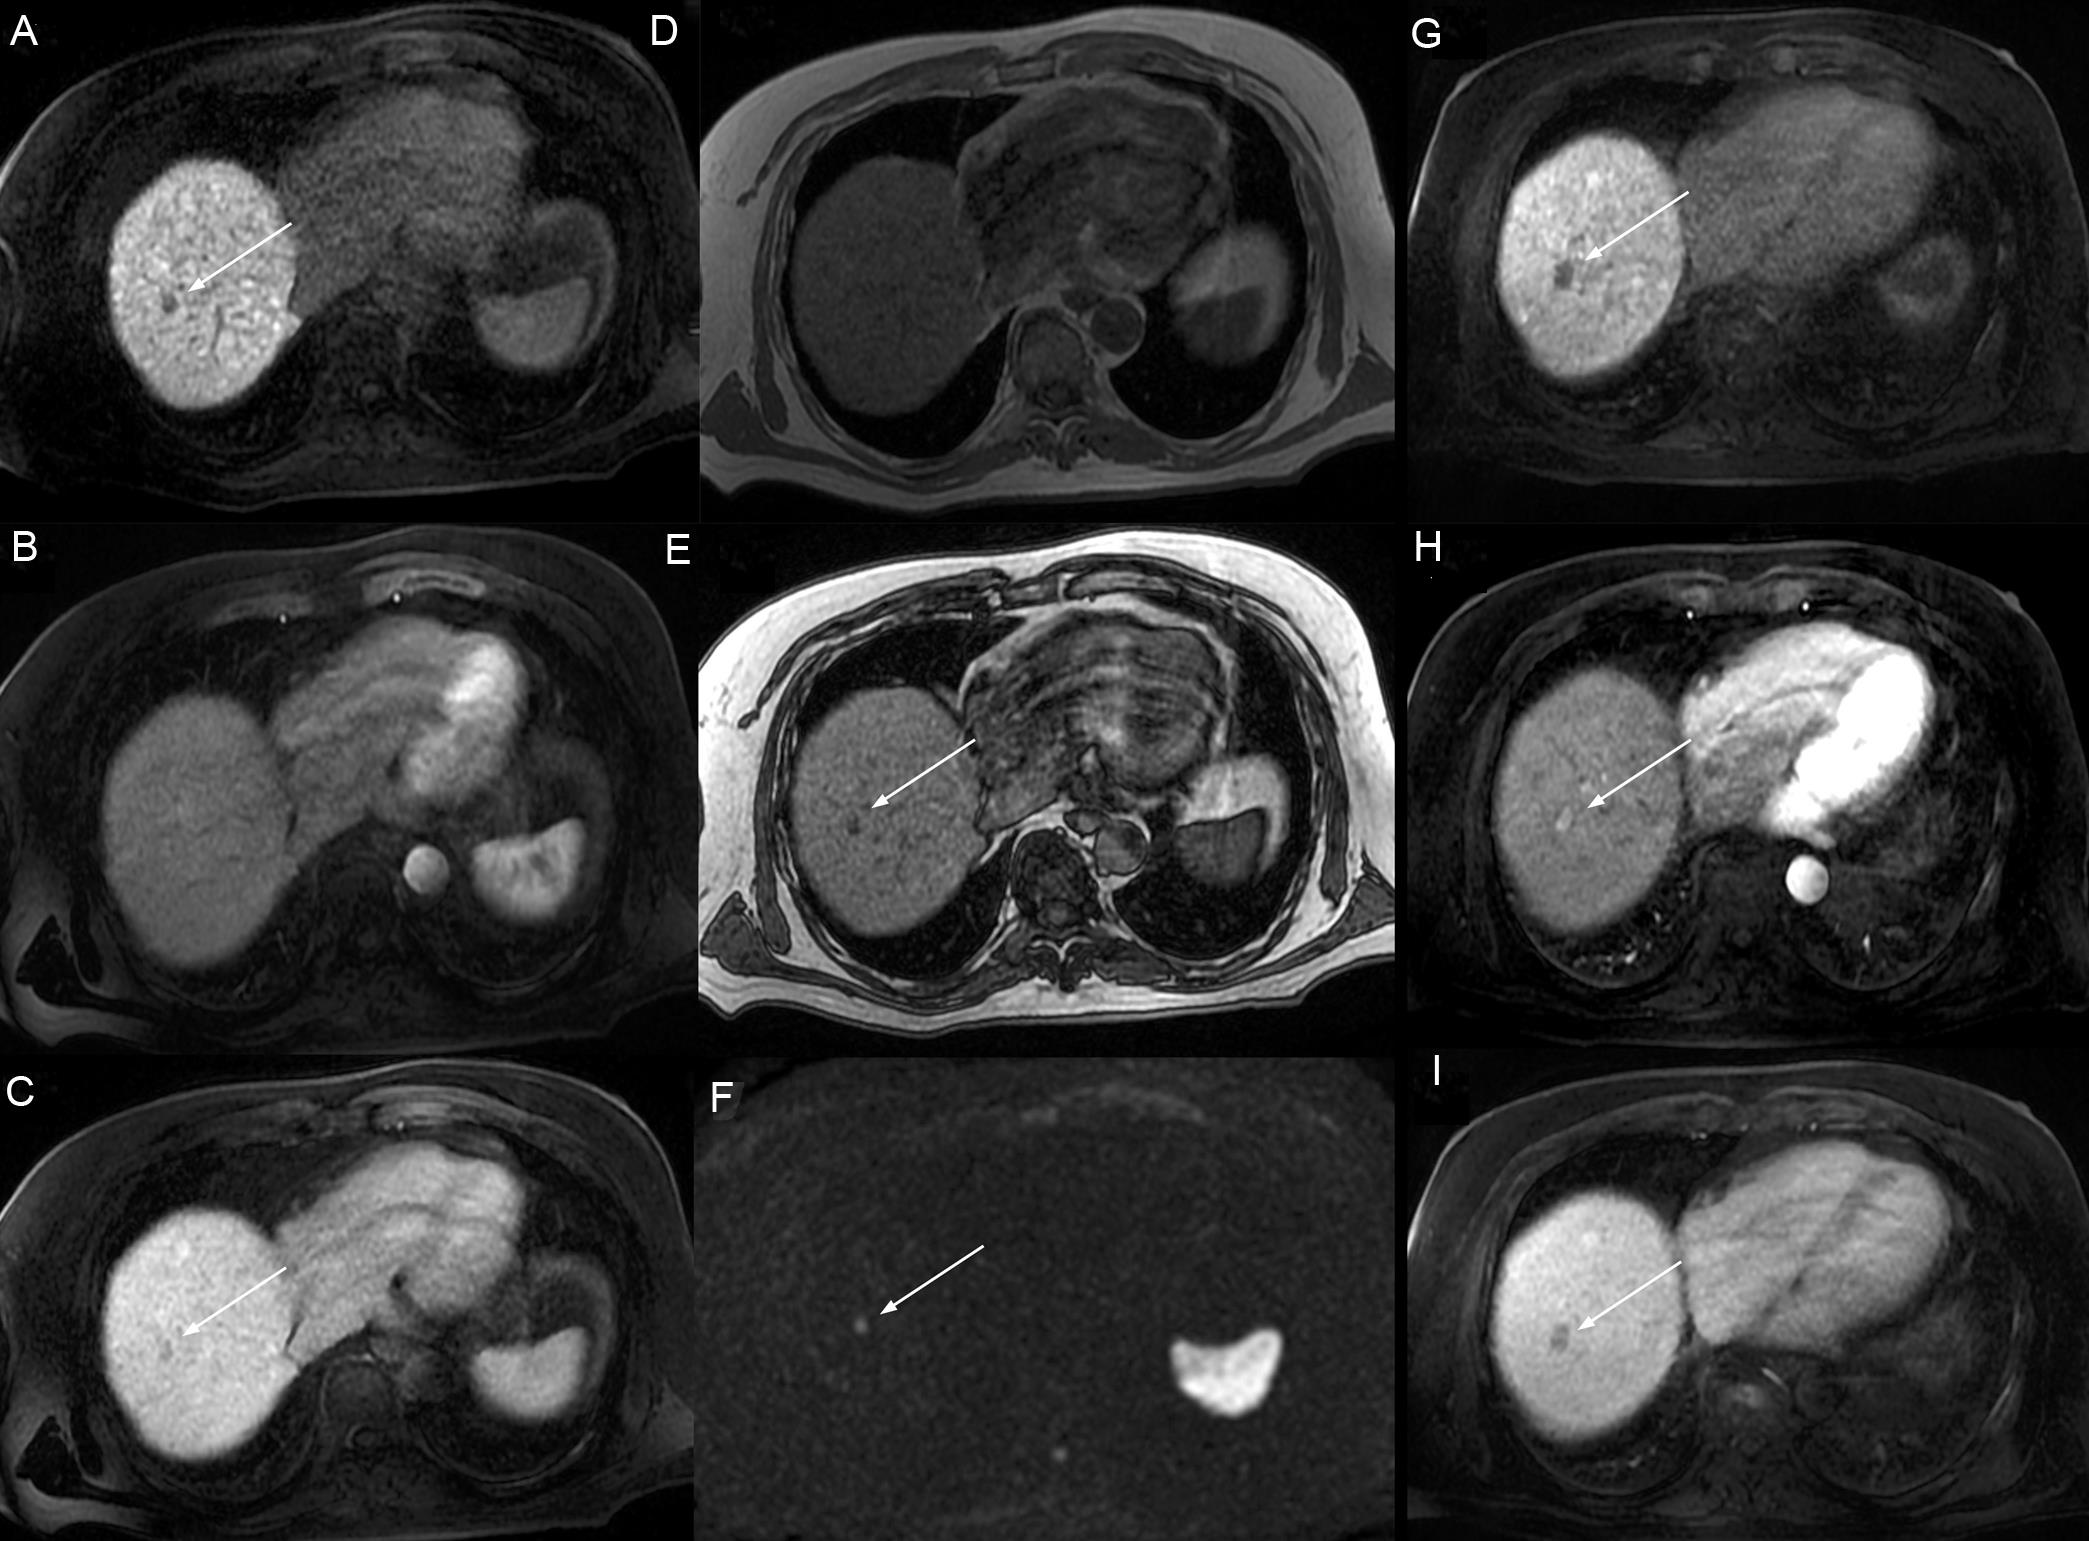 Axial MR images demonstrating a hypointense nodule of 11 mm in the hepatobiliary phase (HBP) located in the liver segment 8.